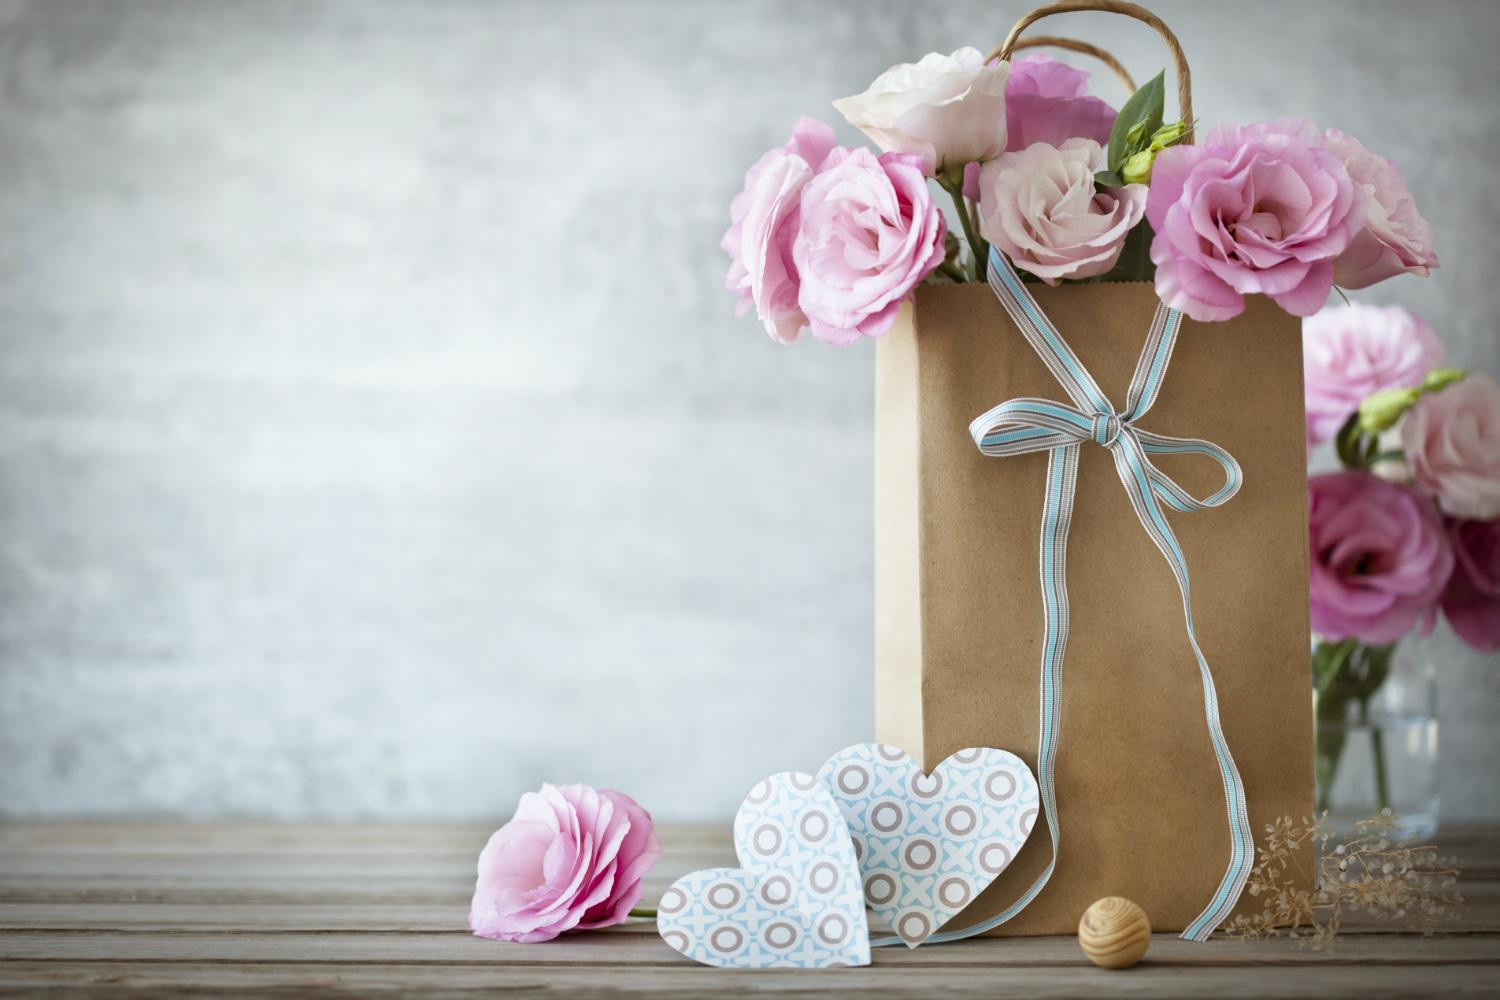 Gifts To Send Mom For Mothers Day
 Send mom something special this Mother’s Day with online